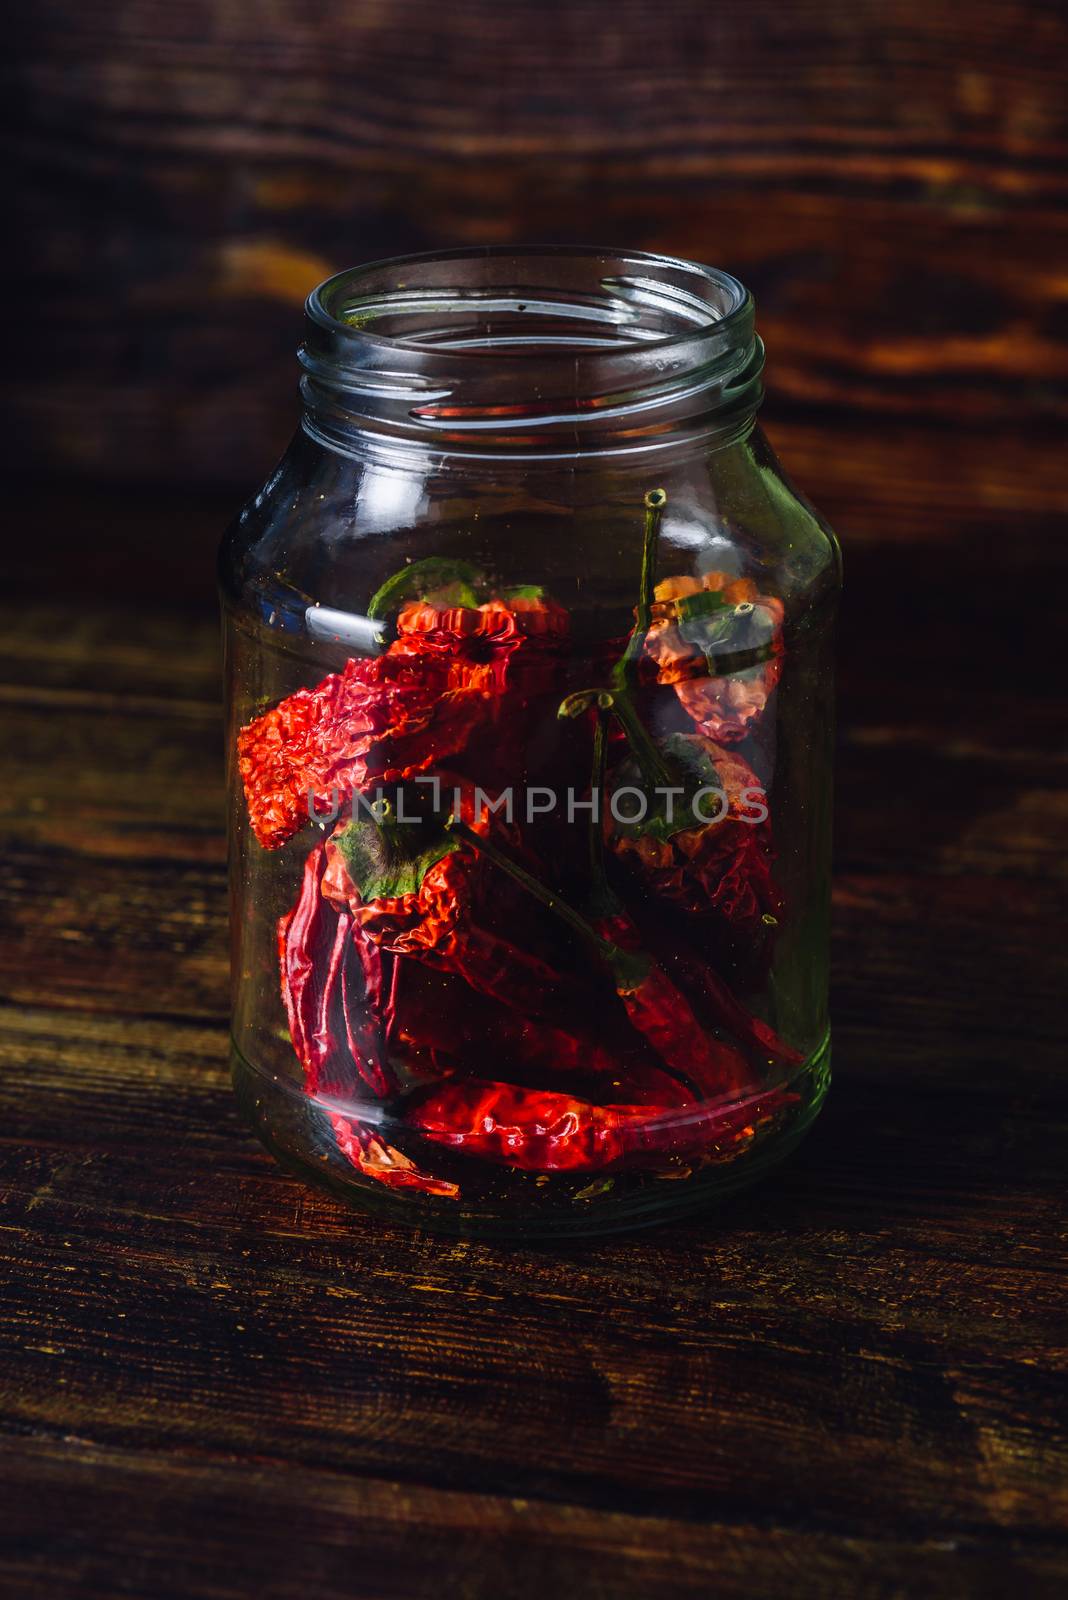 Dry Red Chili Peppers inside the Jar. by Seva_blsv